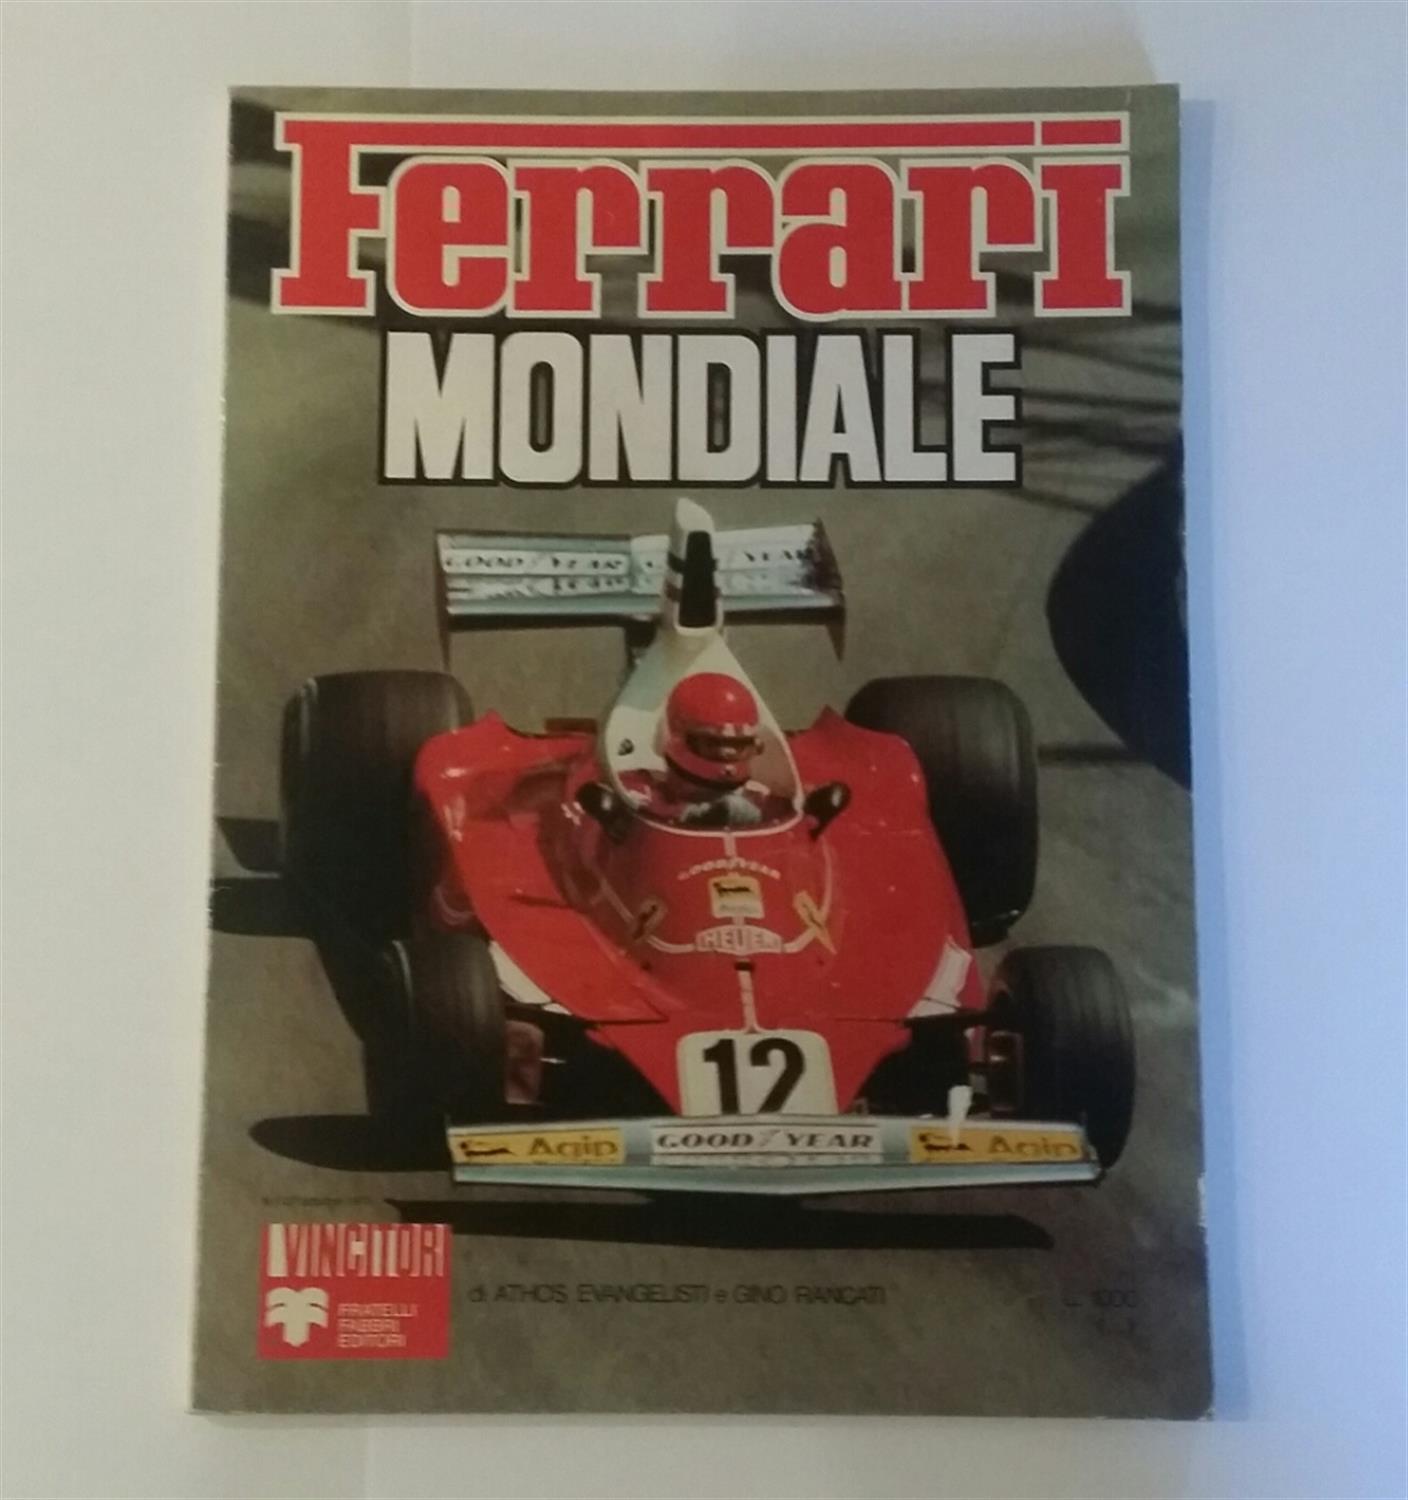 1976 Ferrari Mondiale Official Yearbook with Enzo Ferrari-Signed Business Card - Image 3 of 3